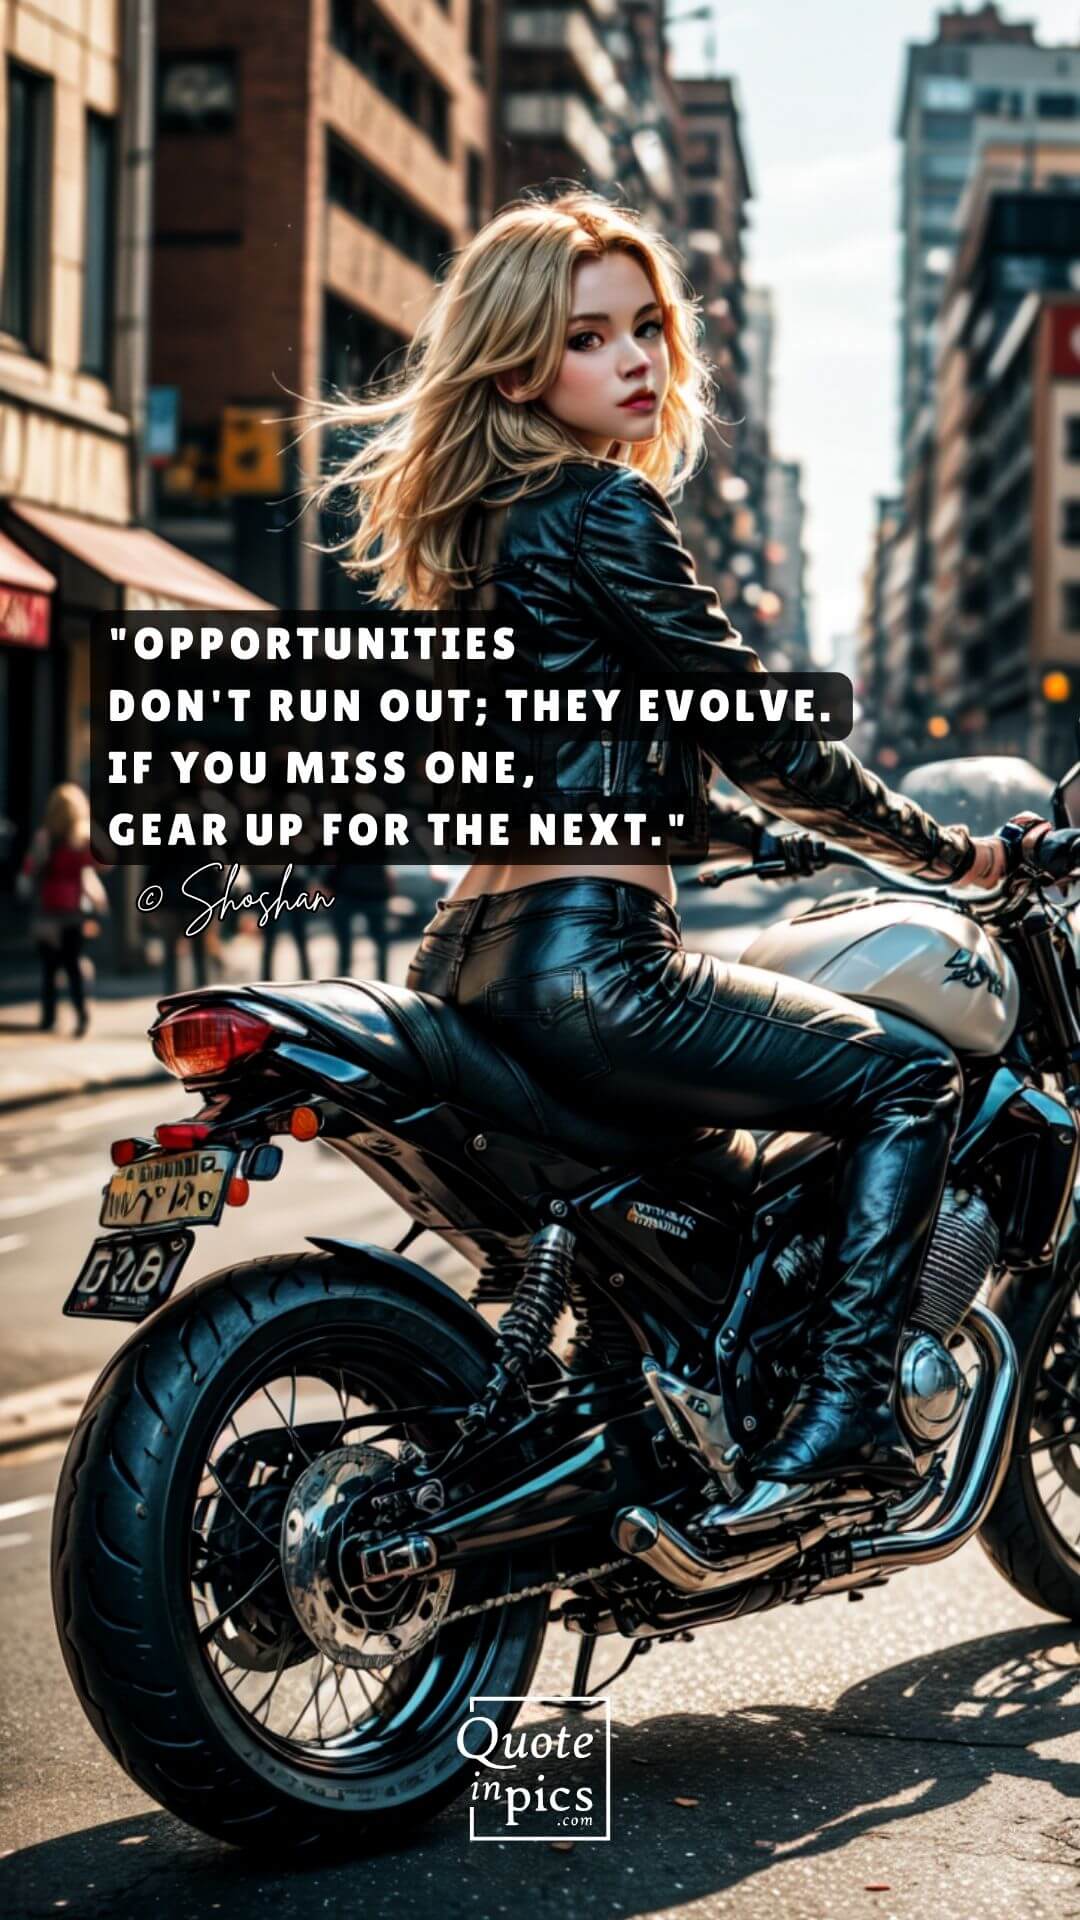 Opportunities don't run out; they evolve. If you miss one, gear up for the next.